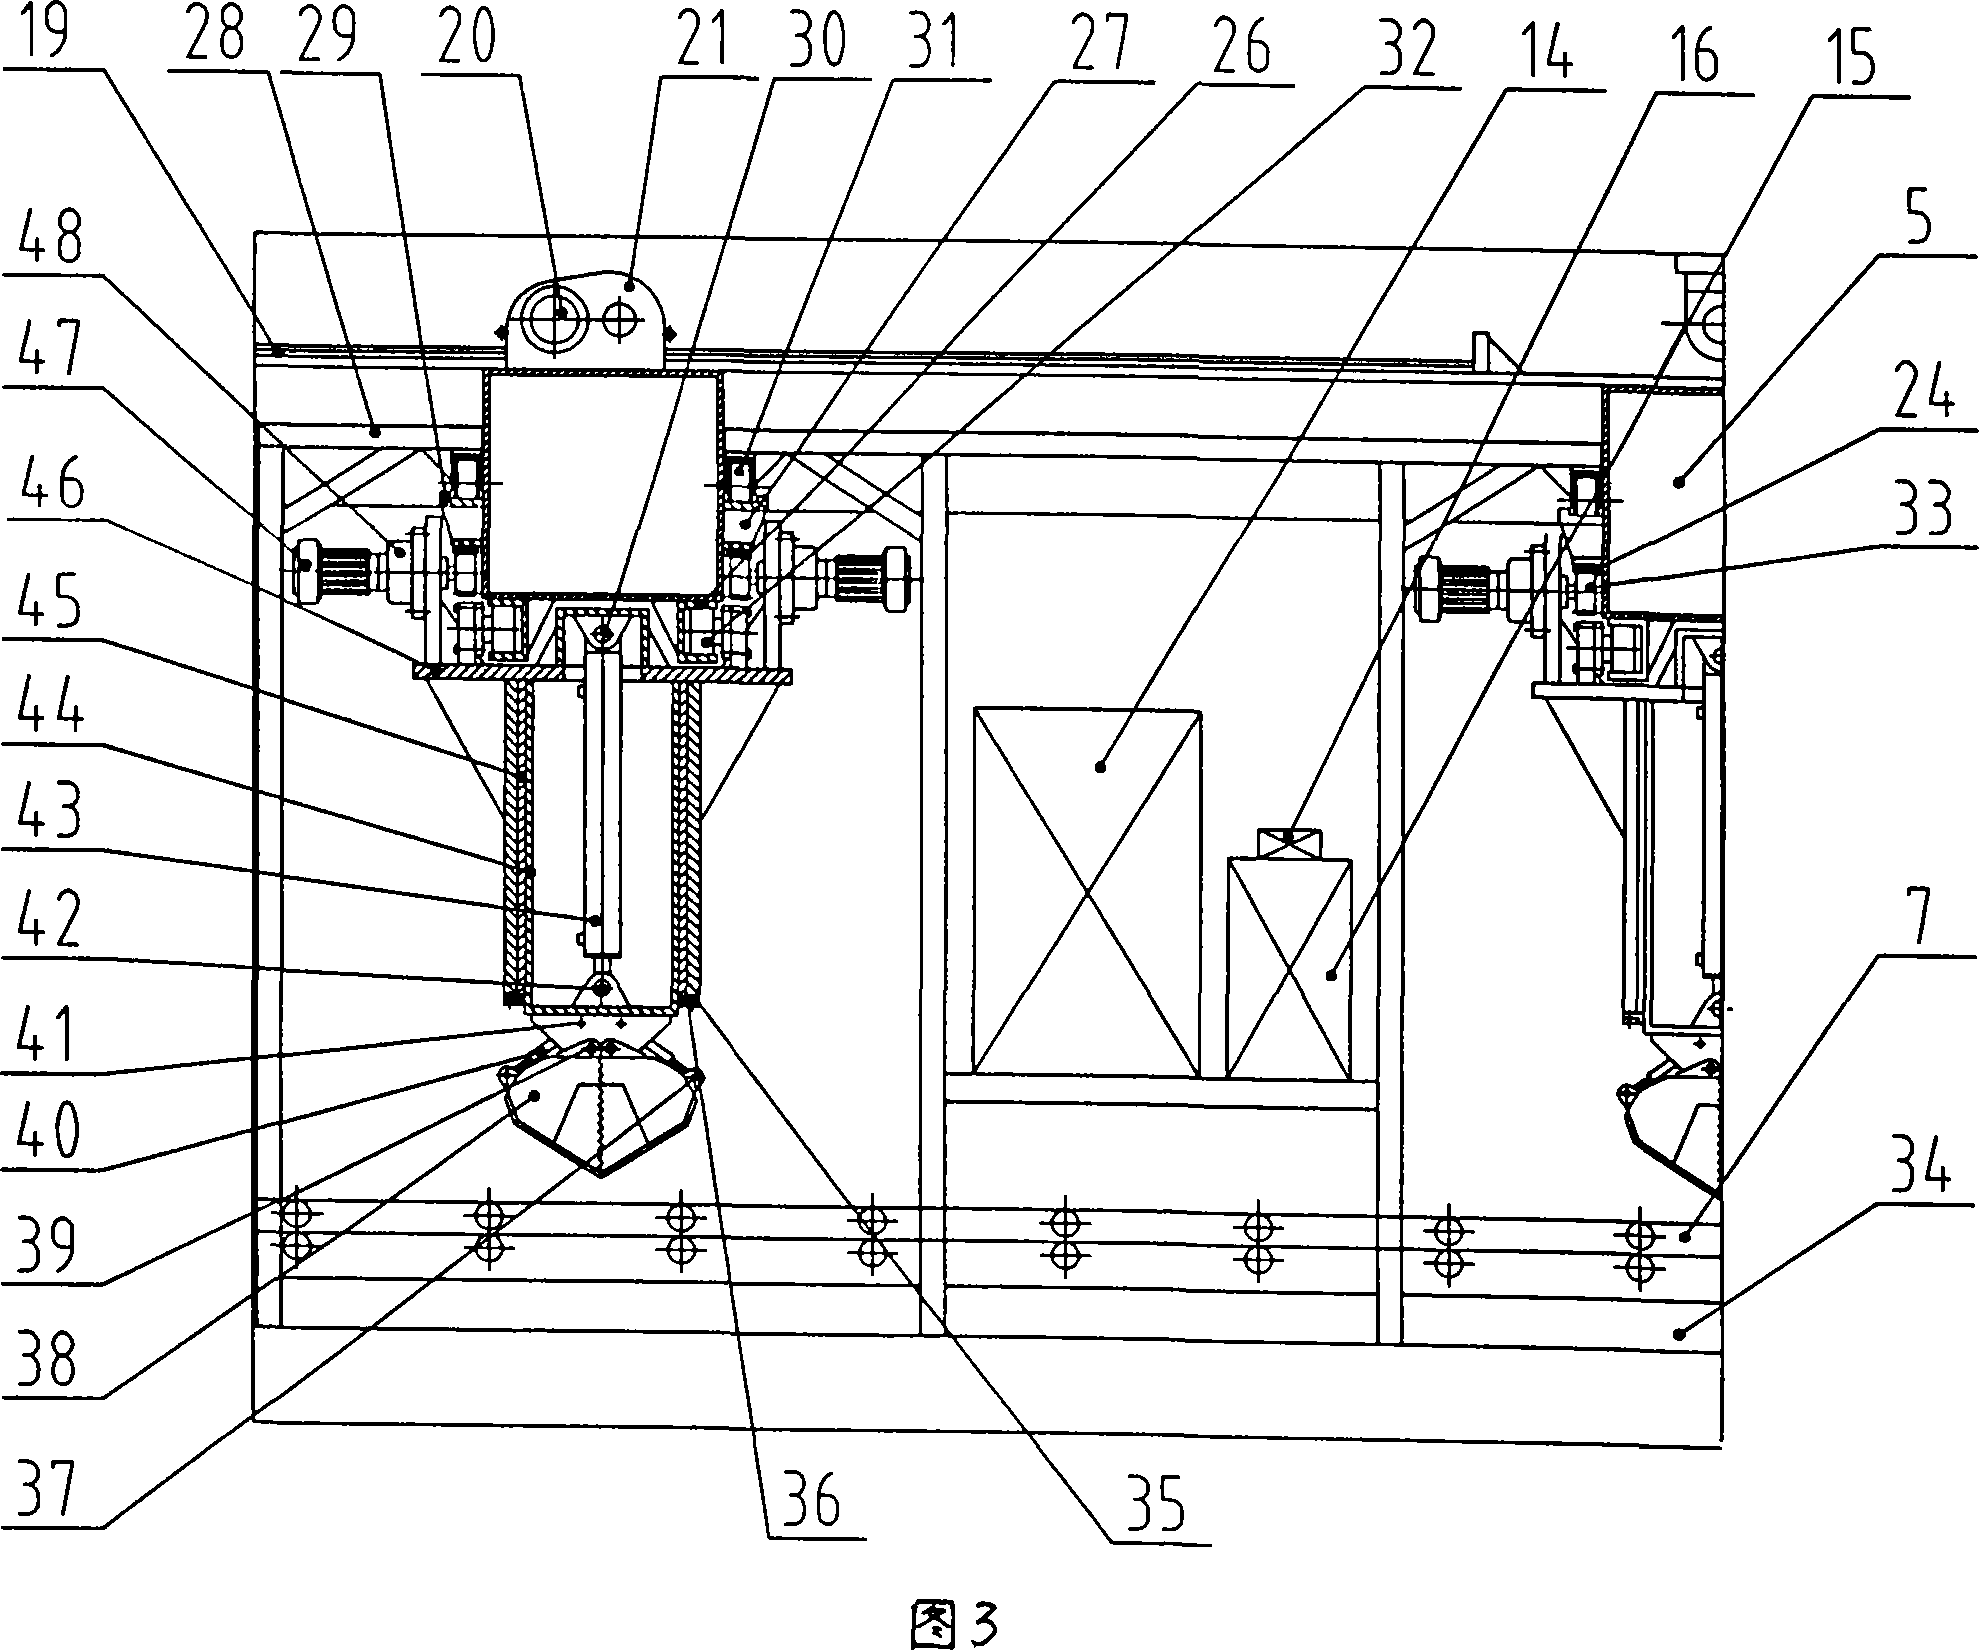 Automatic soil eliminating construction apparatus for deep foundation groove